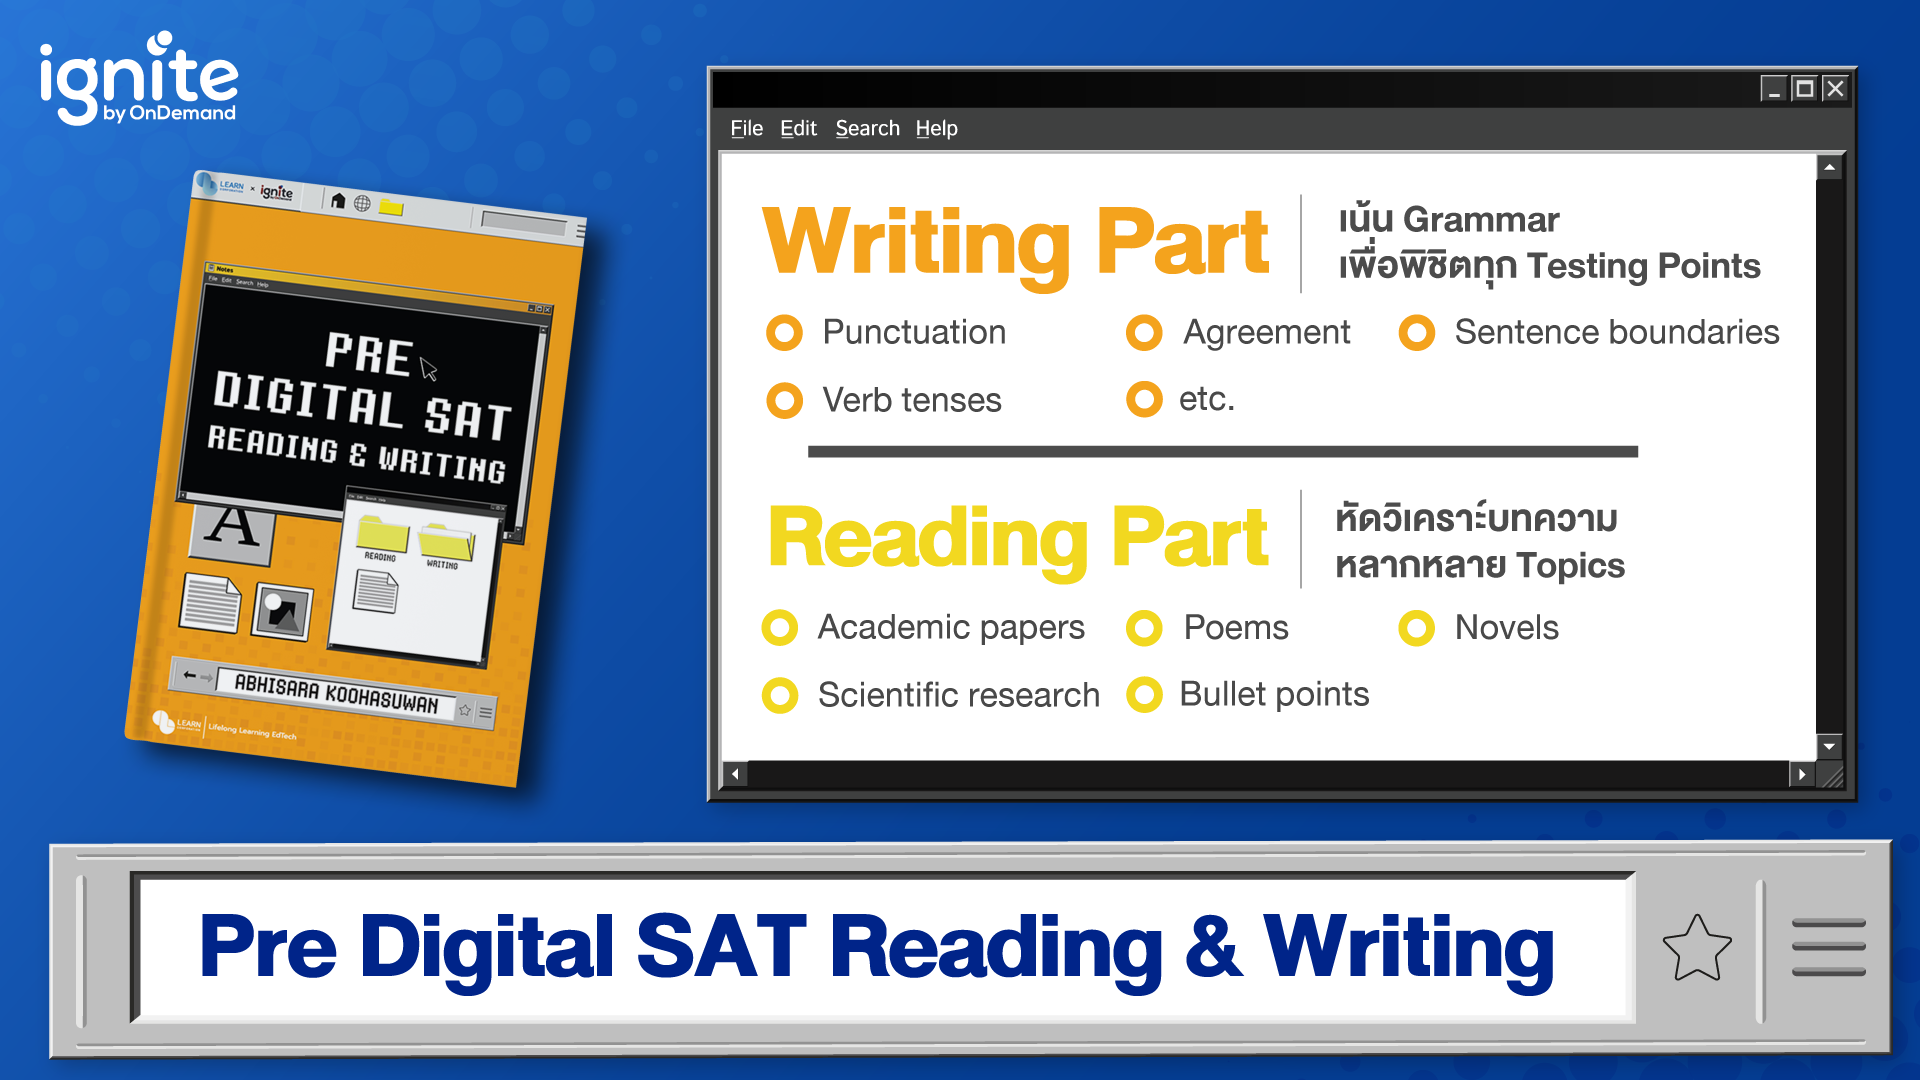 pre digital sat r&w reading and writing - ignite by ondemand